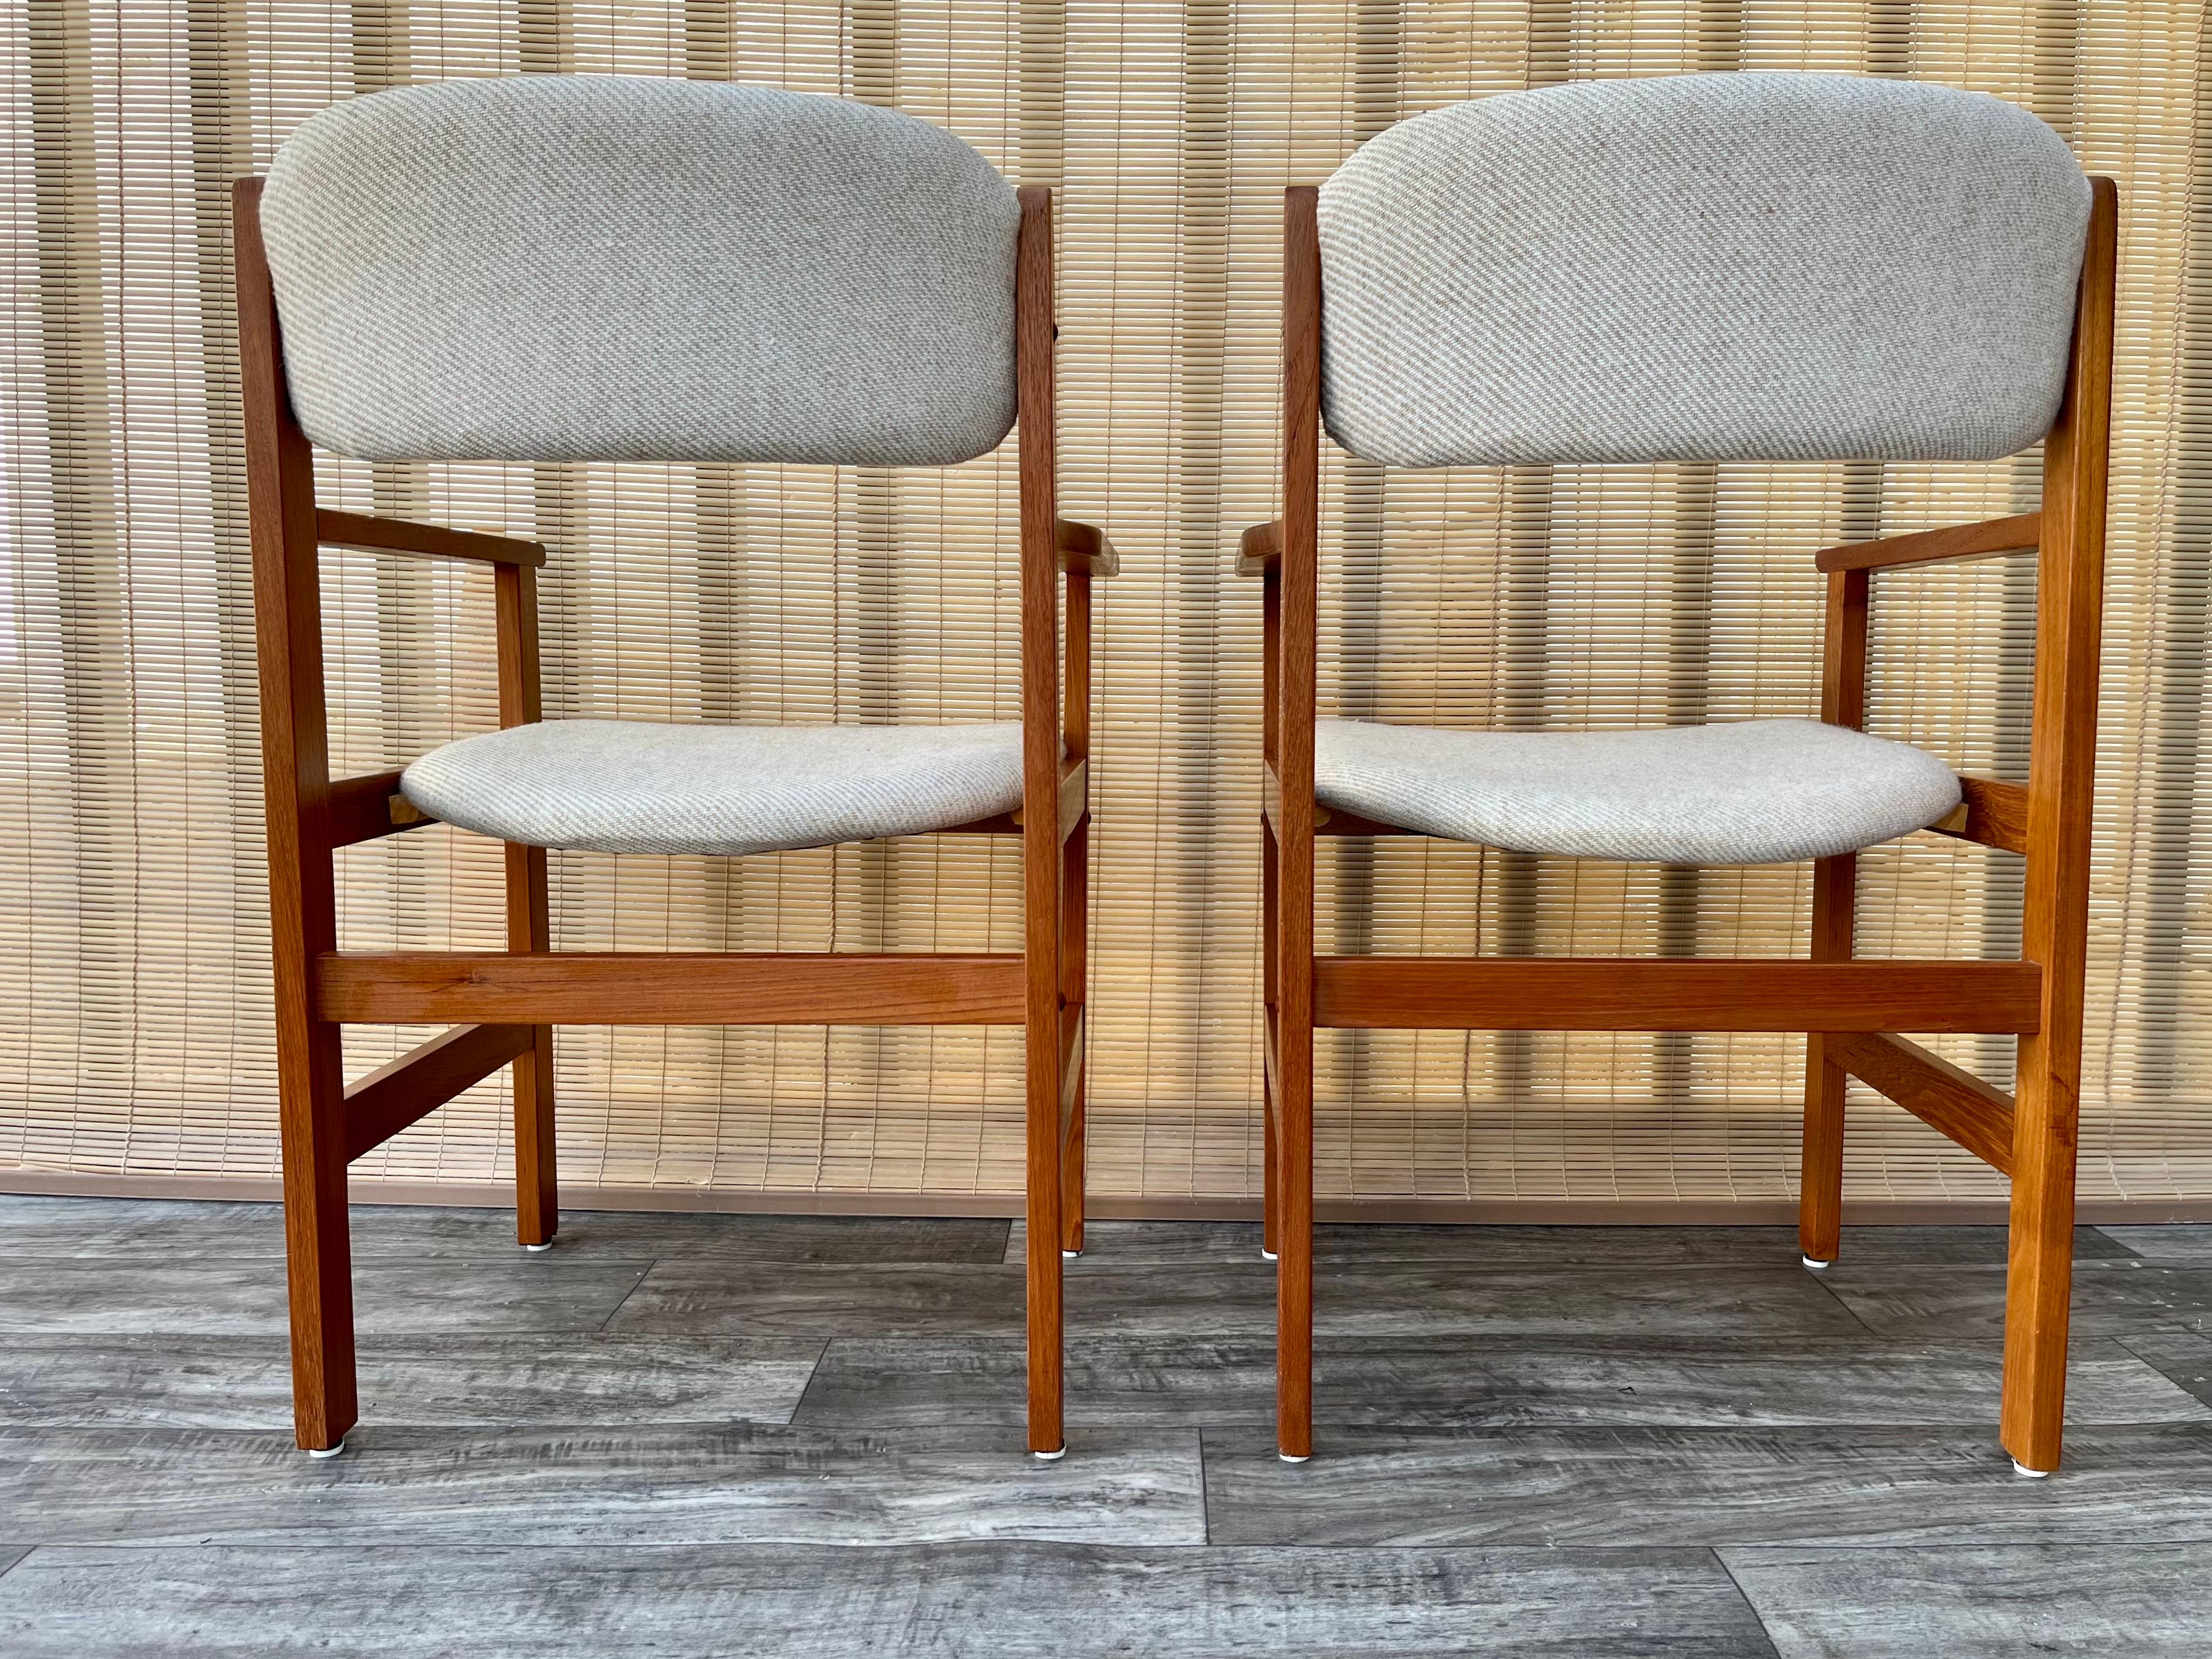 Thai 1980s Mid-Century Danish Modern Style Captain Chairs by Benny Linden Design. For Sale